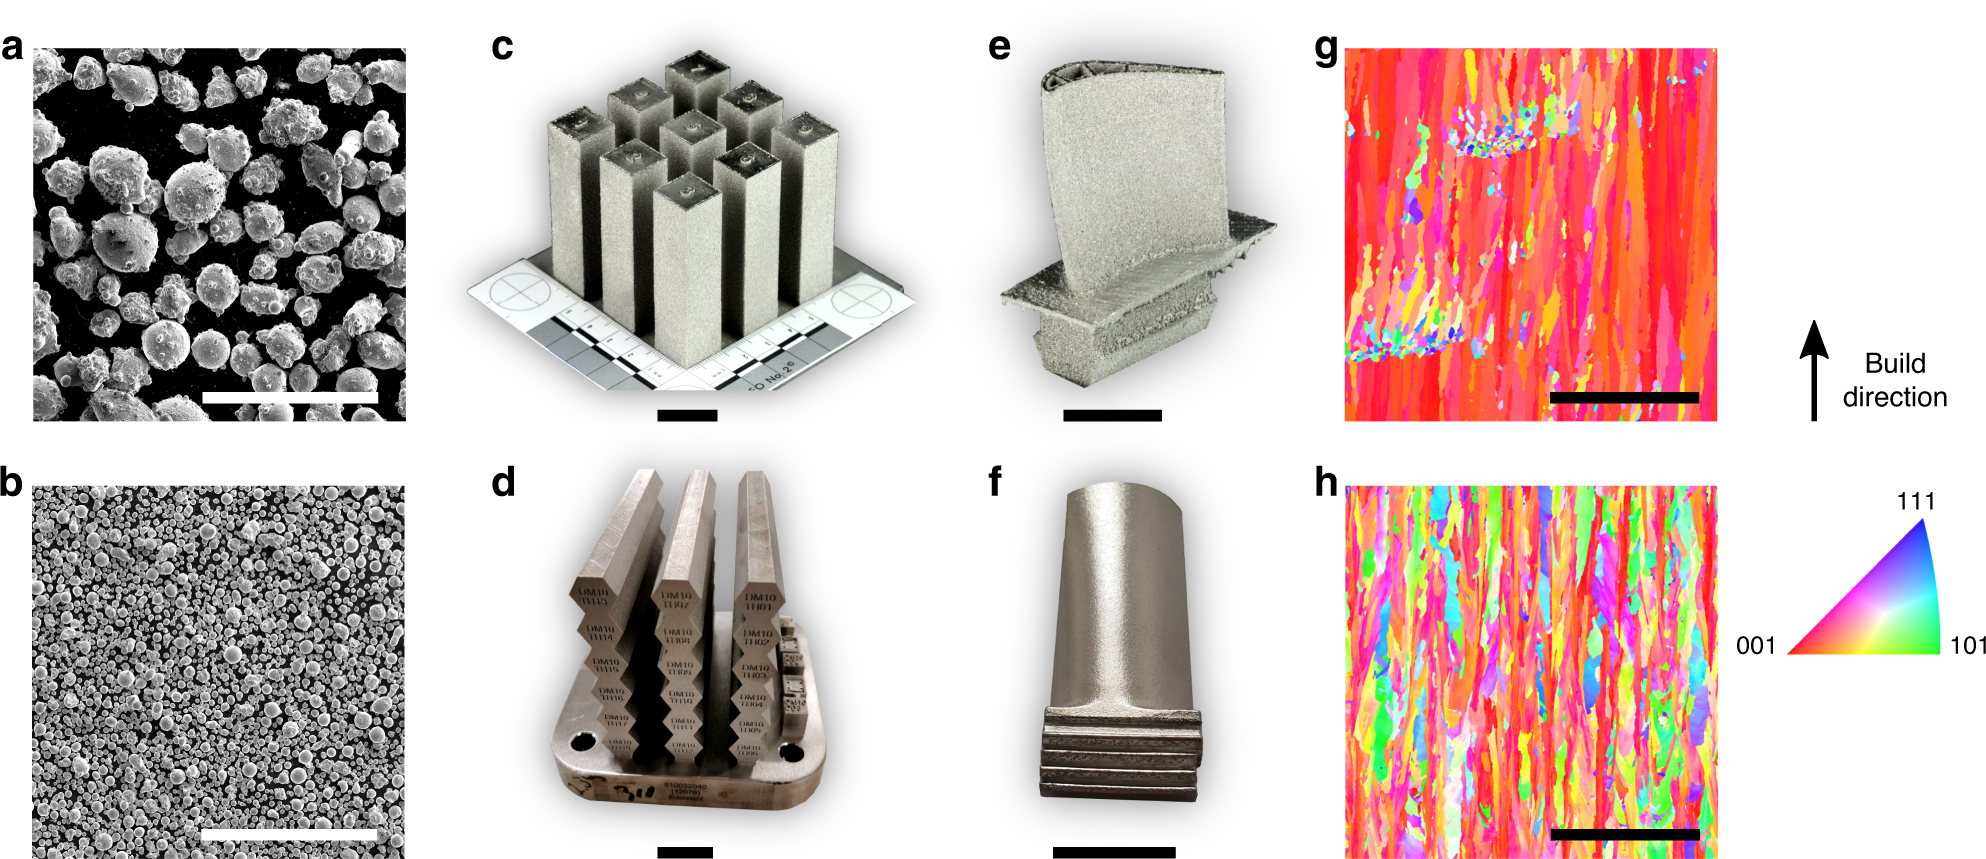 3D printing of metal-based materials for renewable energy applications